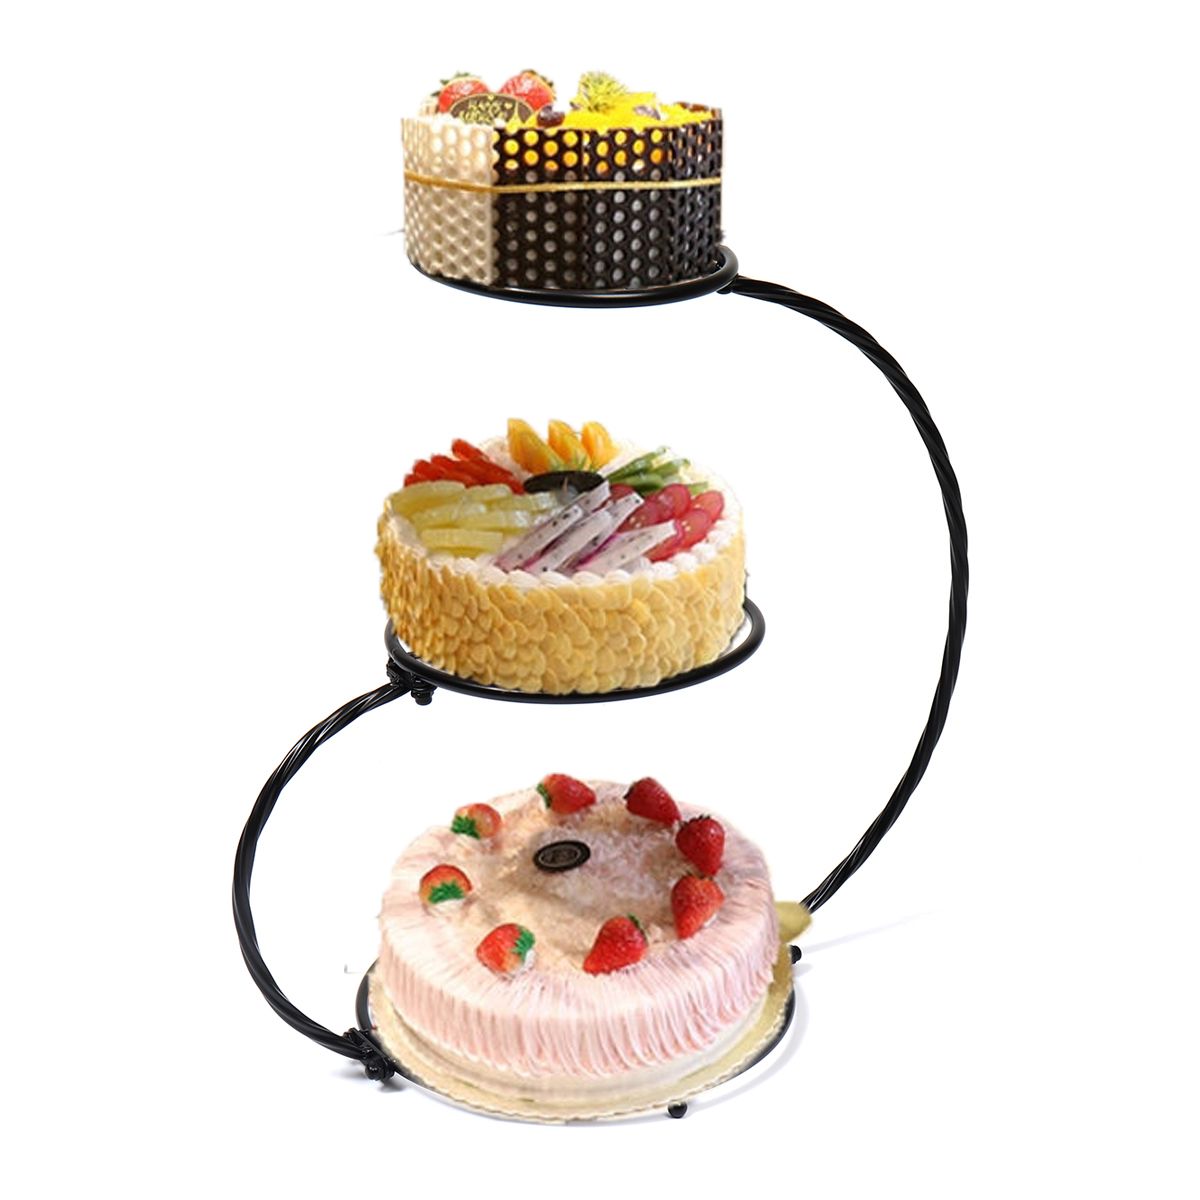 3-Tier-Iron-Cake-Stand-60cm-Height-Wedding-Birthday-Party-Display-Decorations-1458924